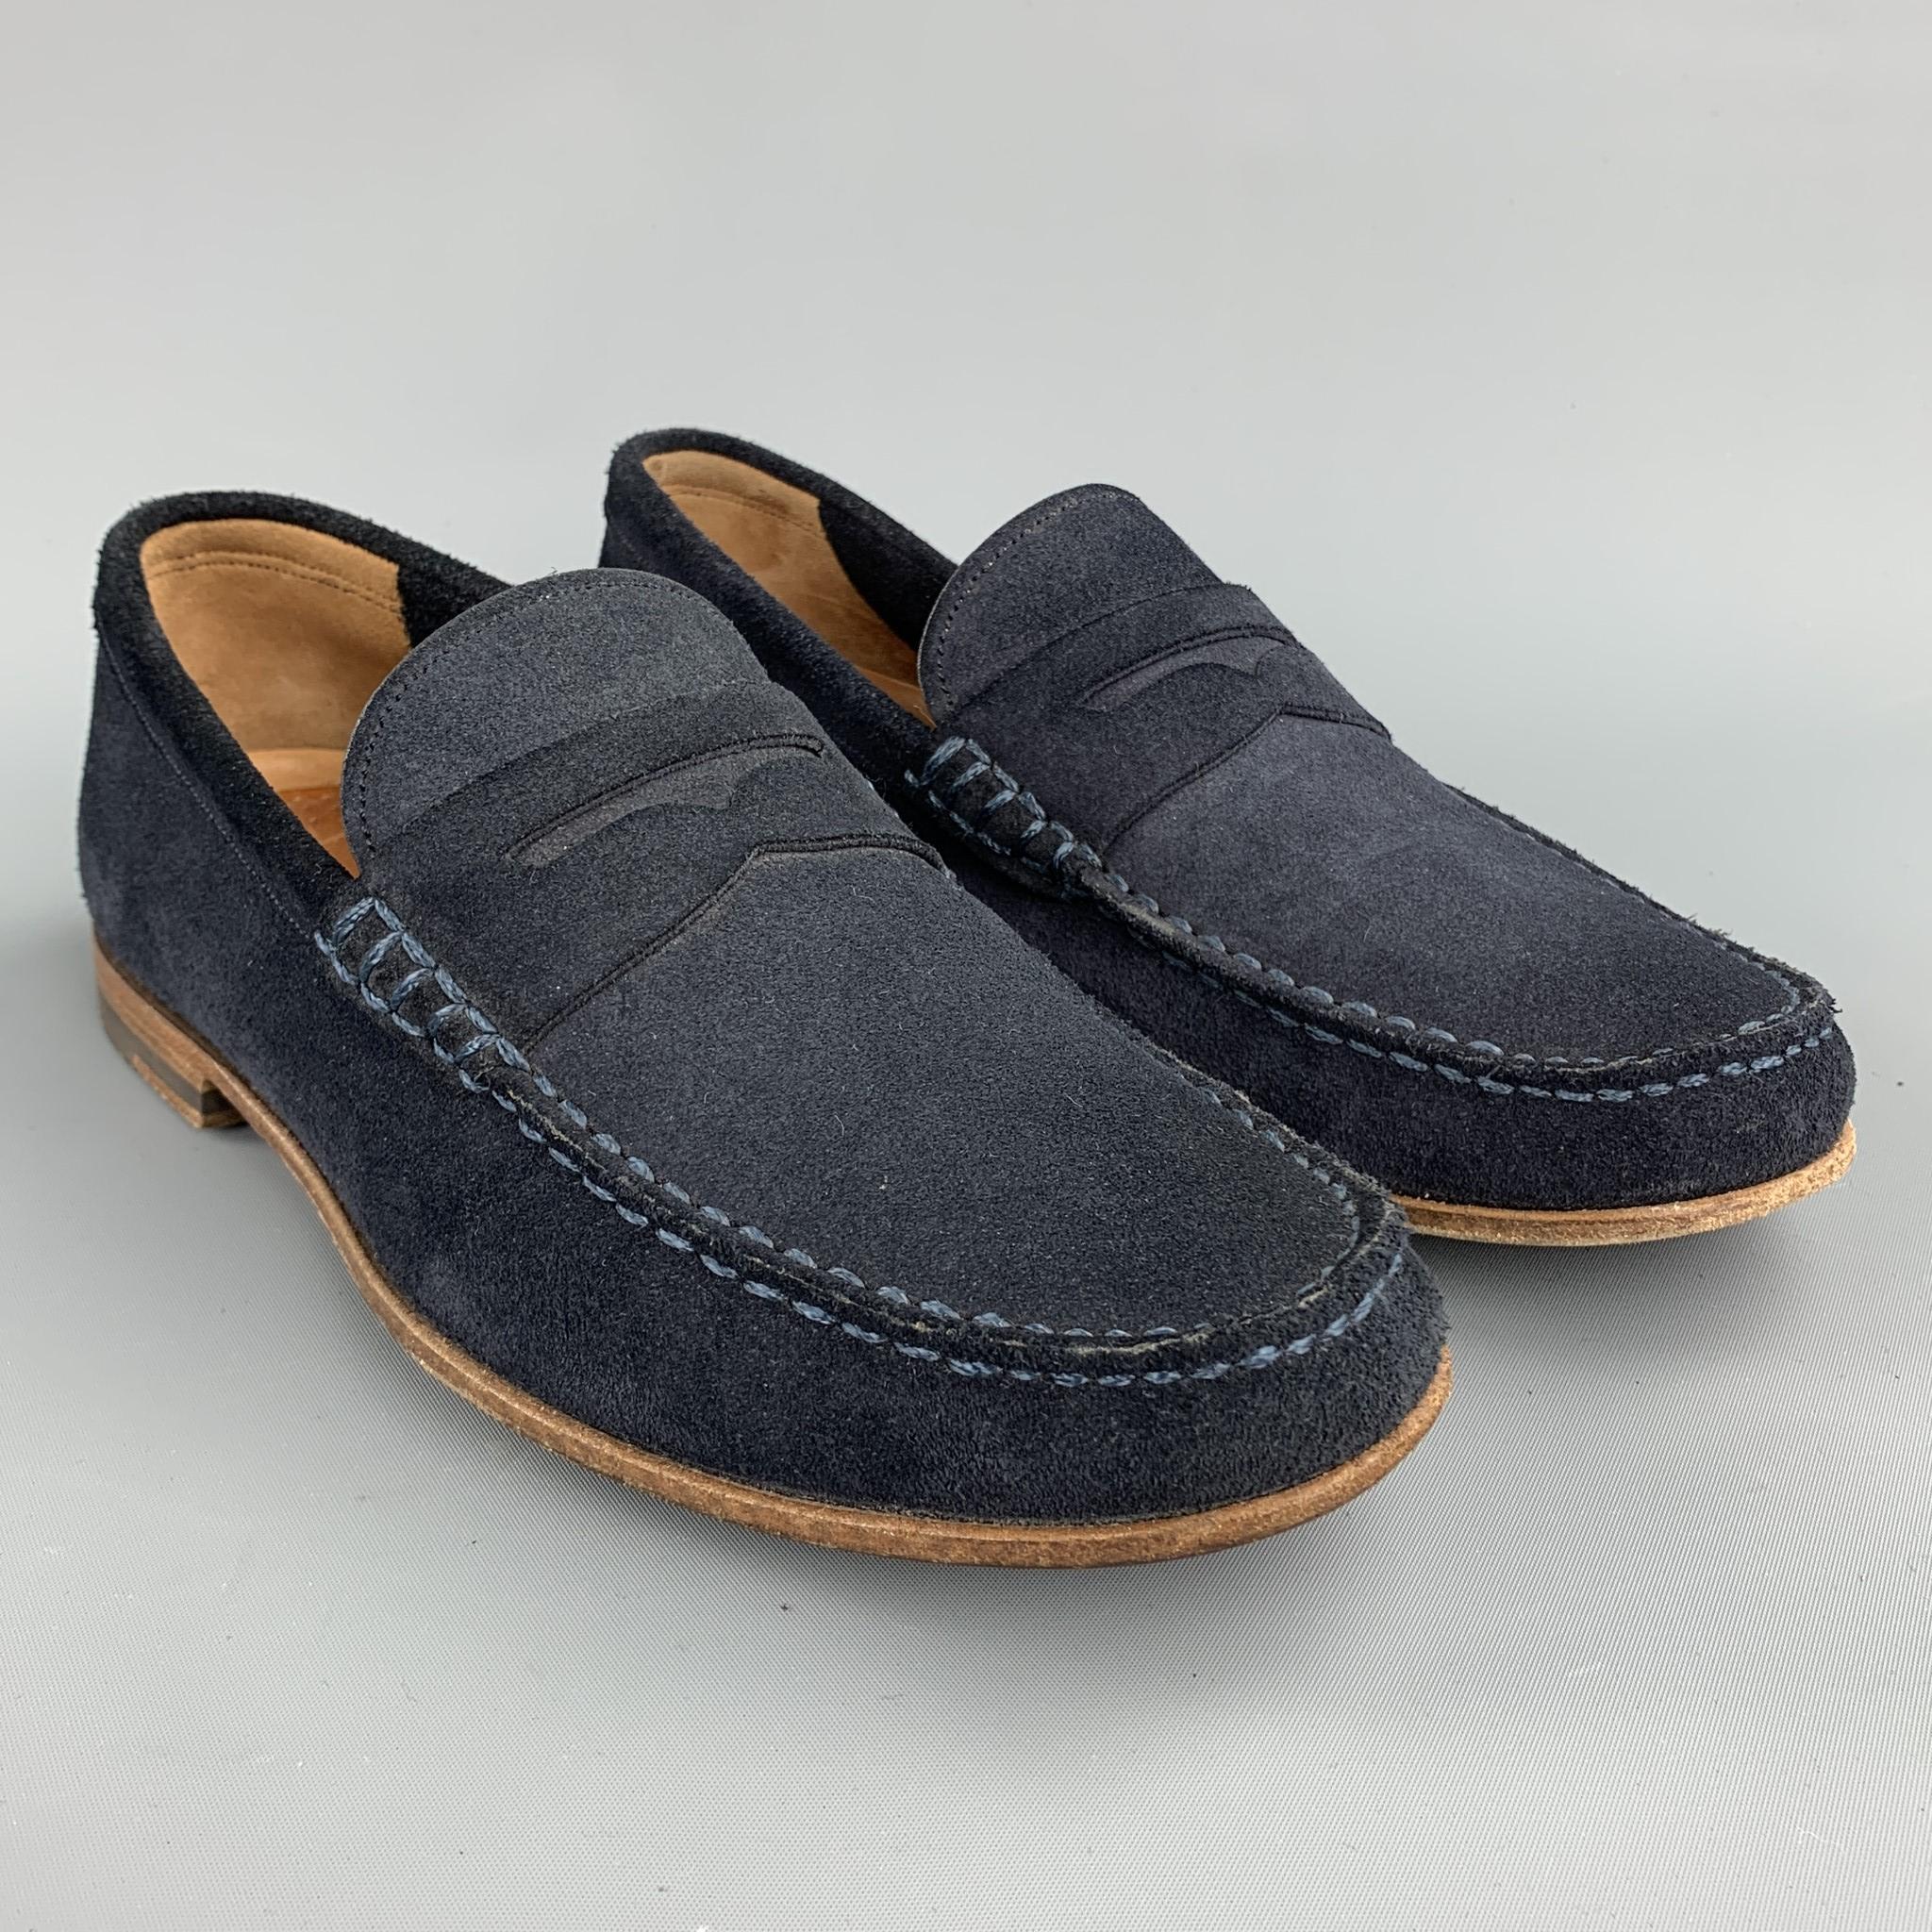 BALLY loafers comes in a navy suede featuring slip on style, contrast stitching, and a wooden sole. Made in Switzerland.

Excellent Pre-Owned Condition.
Marked: 41

Outsole: 

11 in. x 4 in. 

SKU: 72998
Category: Loafers

More Details
Brand: